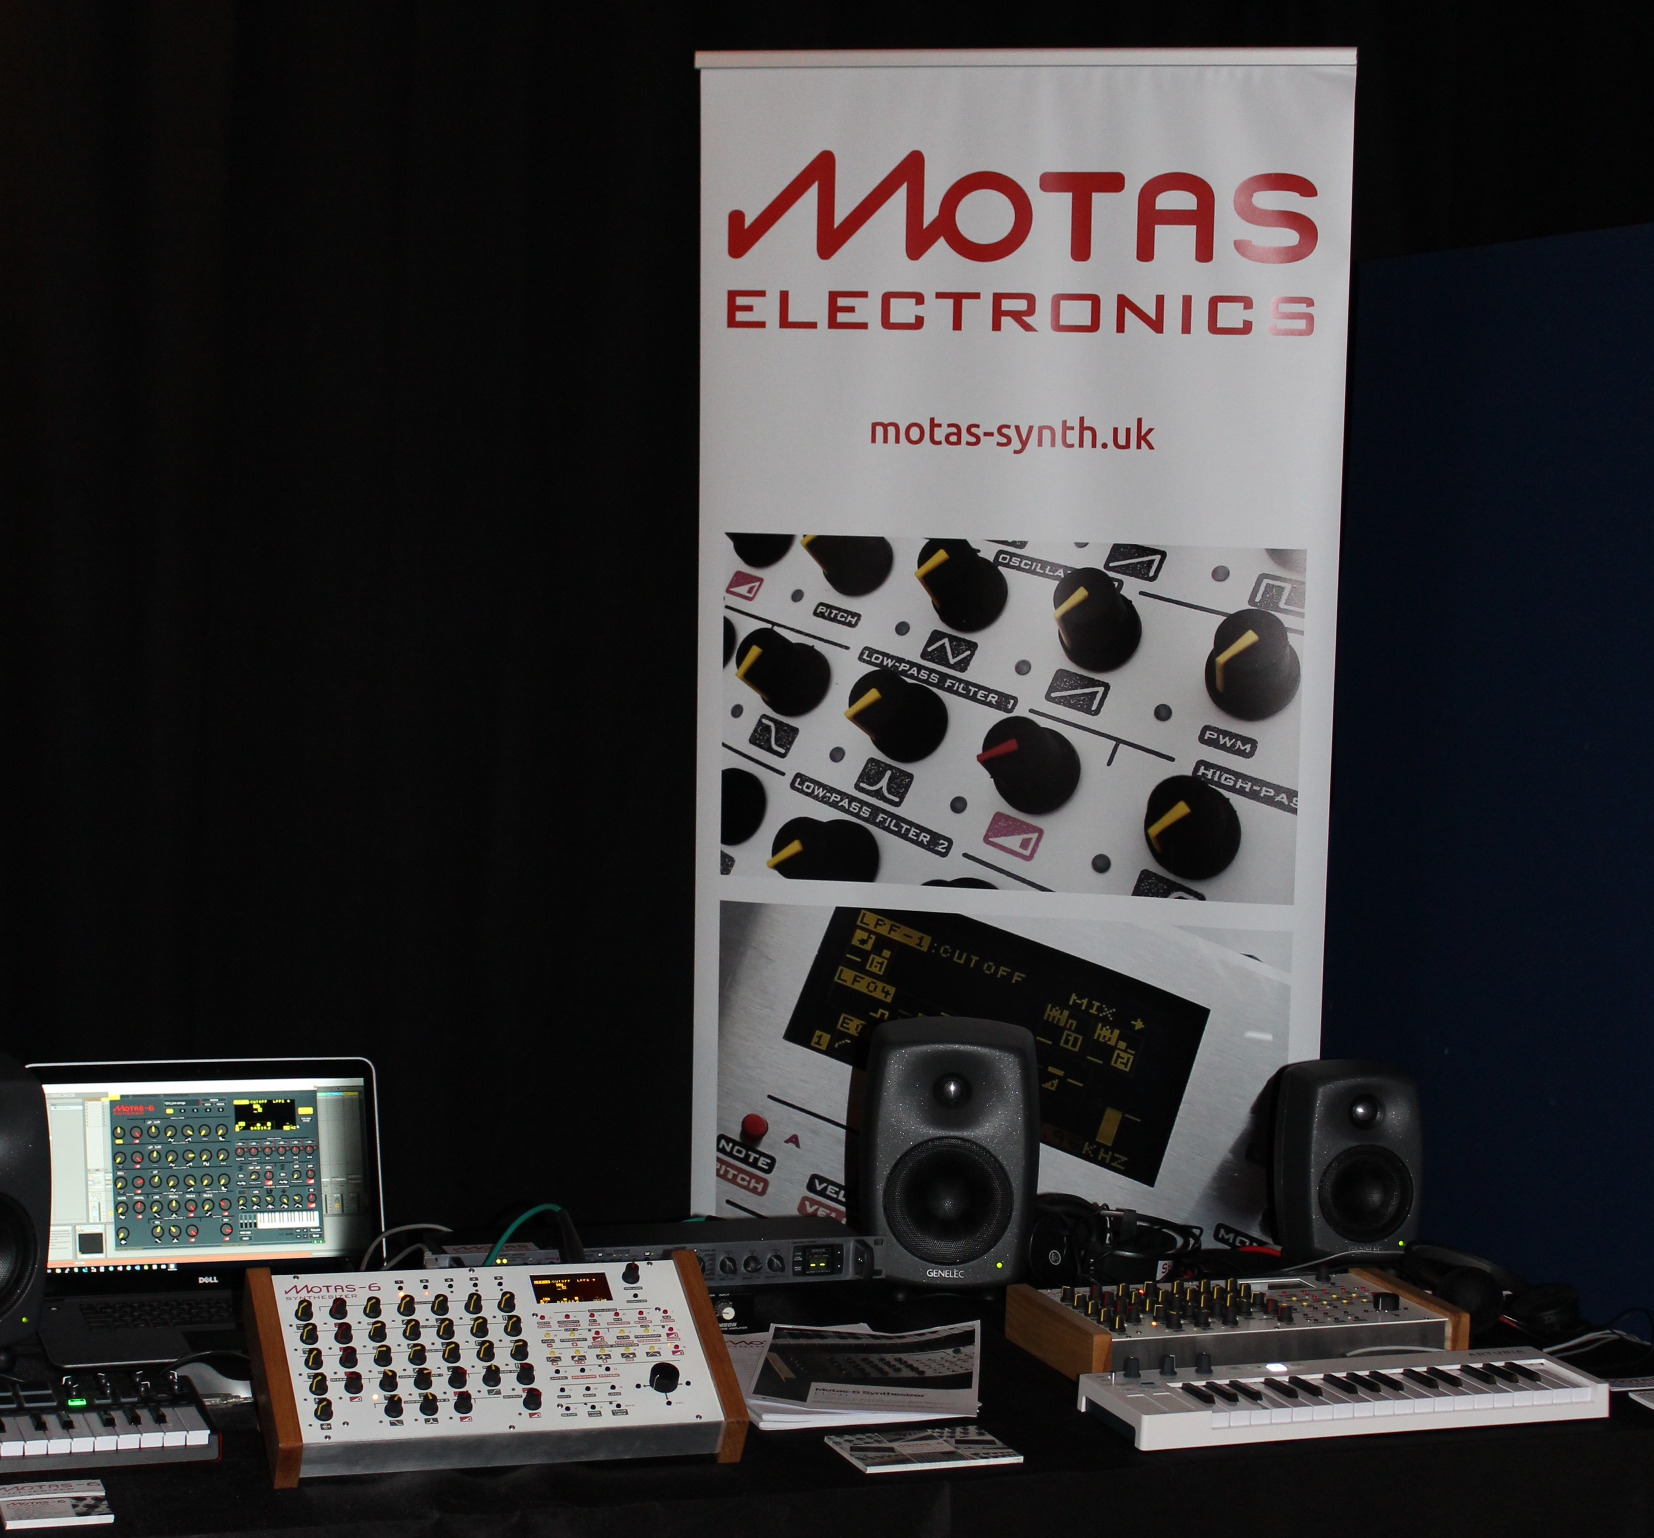 Motas-6 at Synthfest 2019